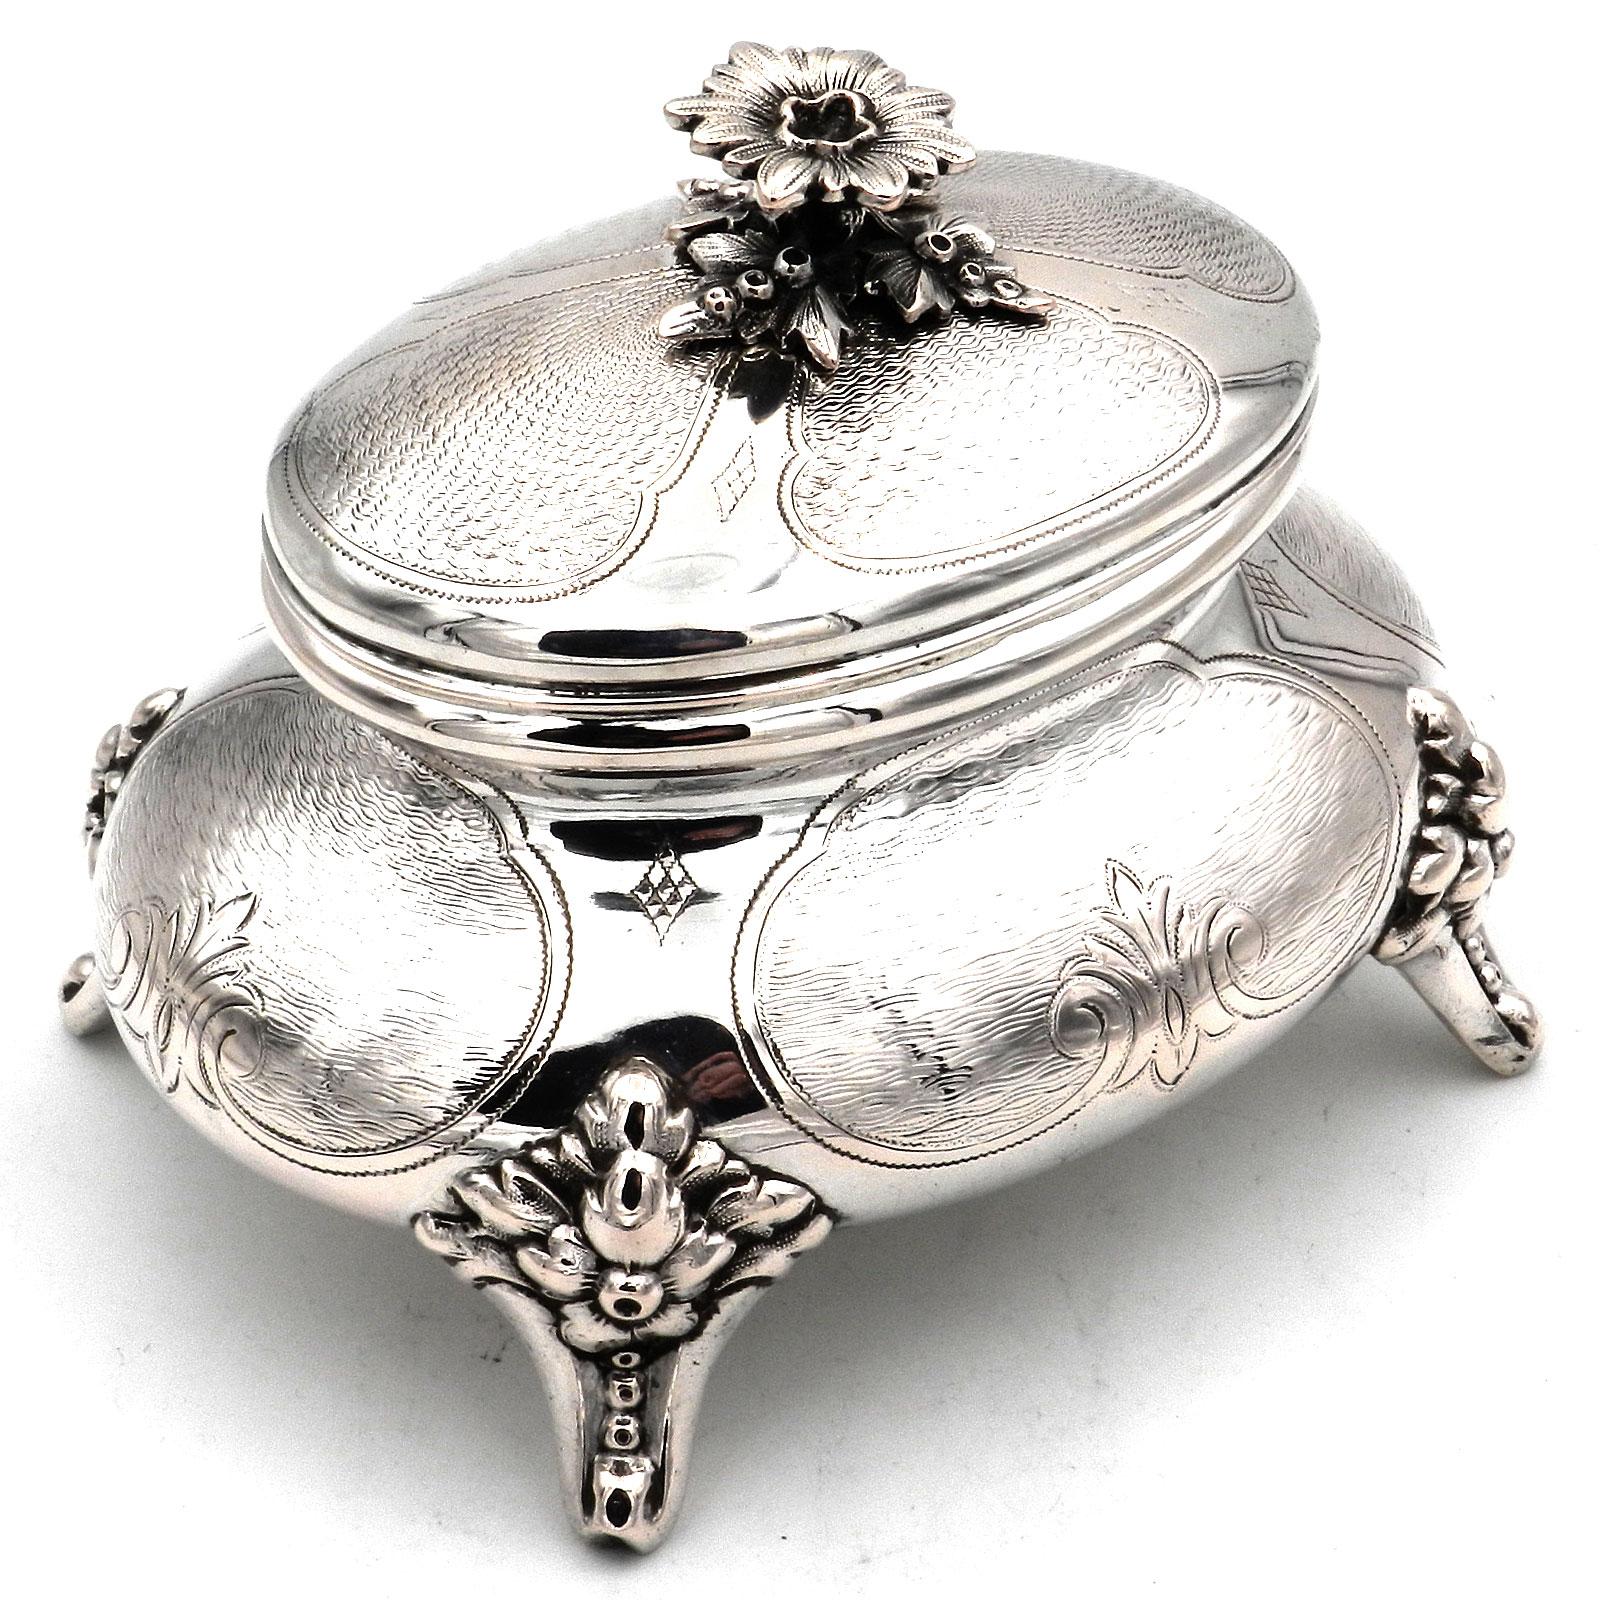 Antique German Biedermeier Silver Sugar Box circa 1870

Elegant sugar bowl on volute feet, oval, bulging body with engine-turned ornamental decoration and stylized flowers, domed cap lid with magnificent flower finial. Gold plated inside.

 

12